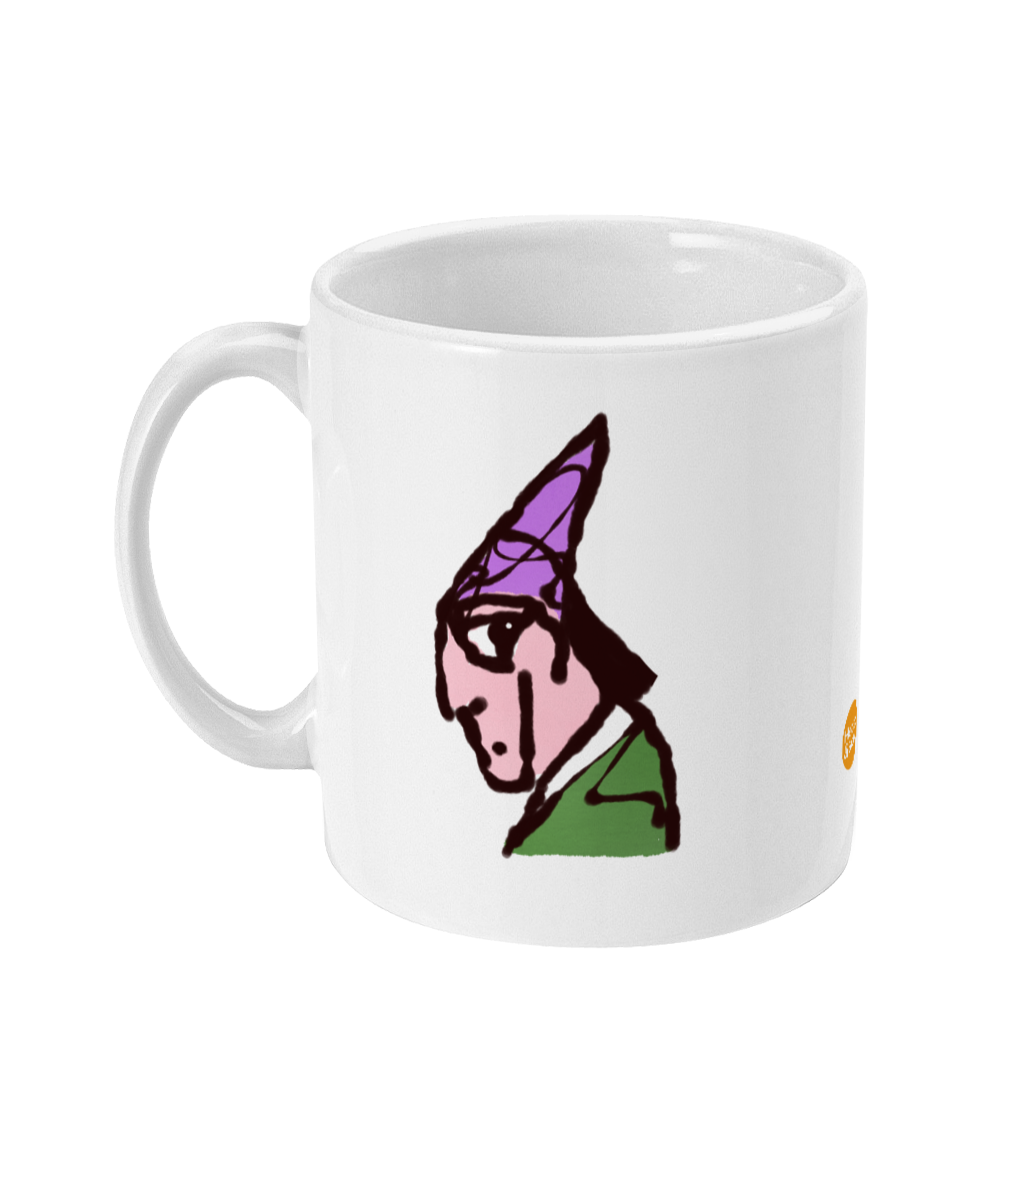 Wizard mug design - Original illustrated Wizard coffee mugs by Hector and Bone - Left View